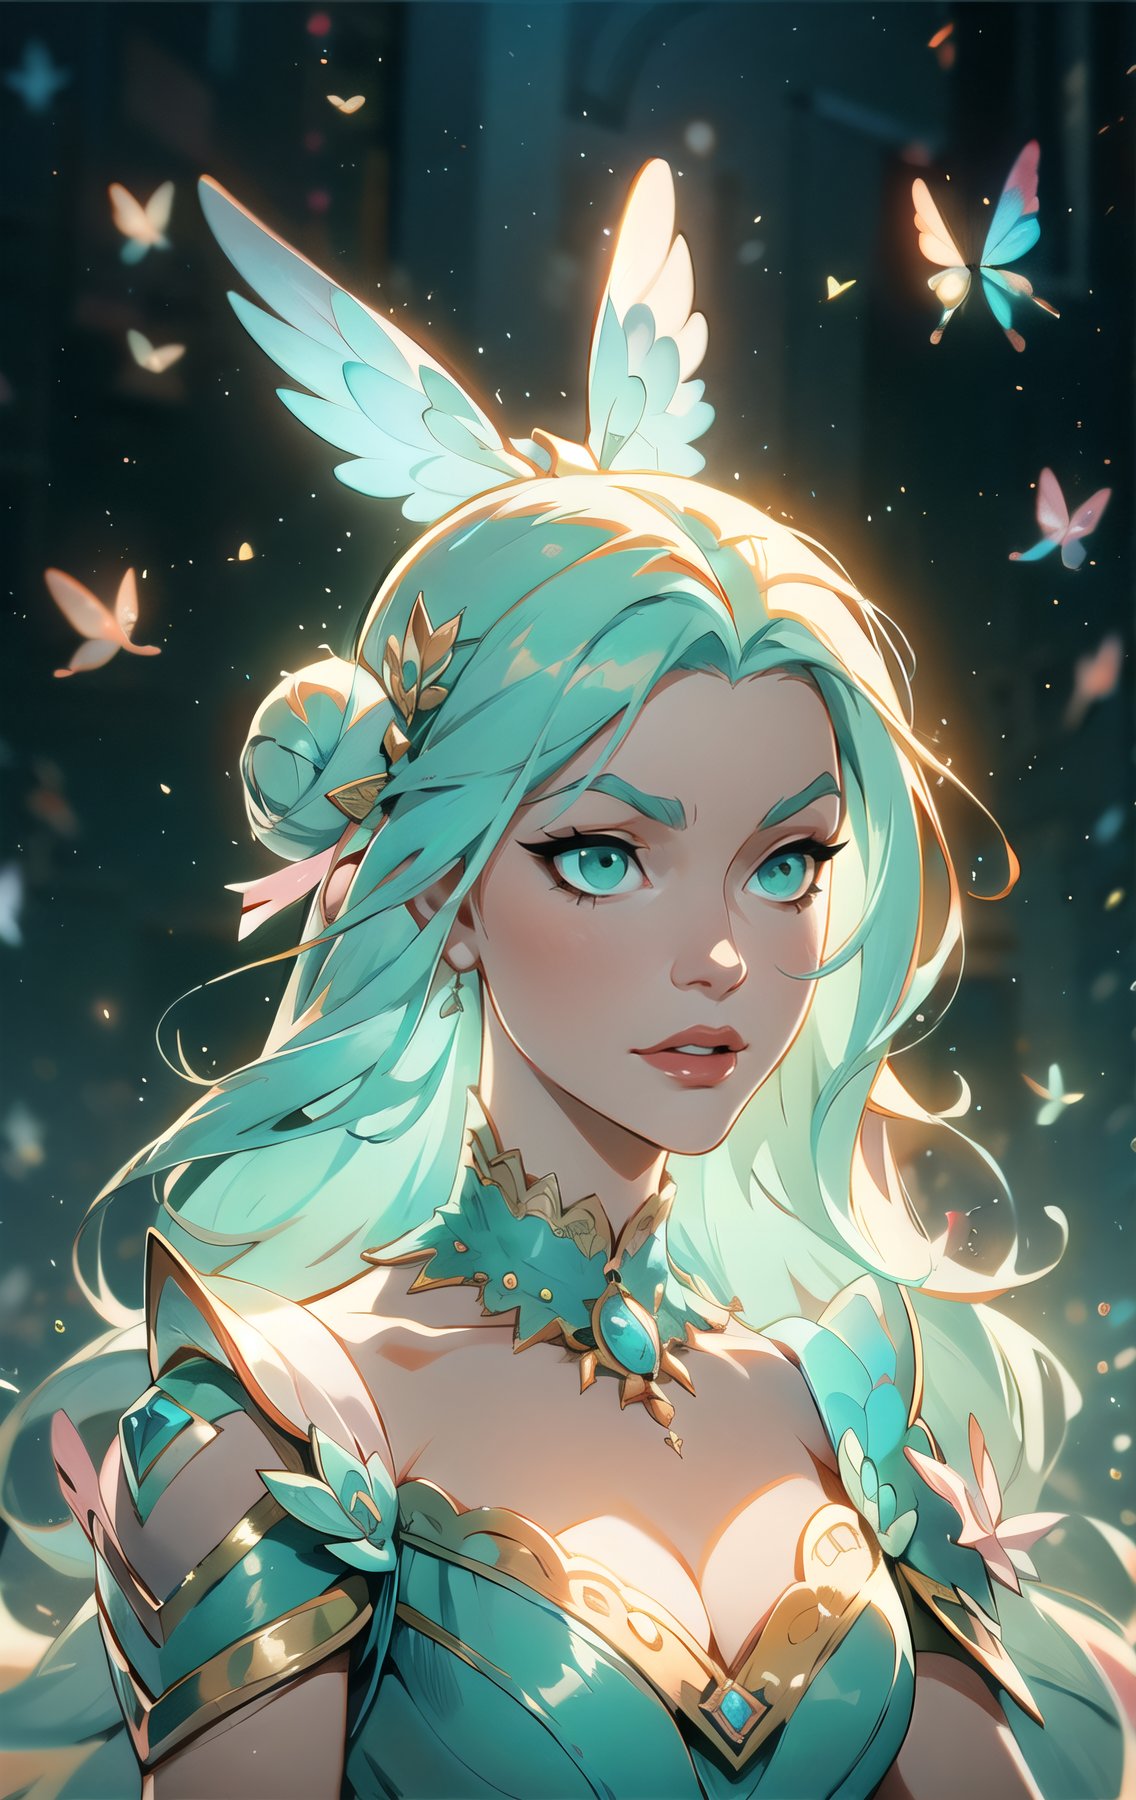 The best quality,superrealism,(ultra detailed face),(perfectly drawn body),surreal digital illustration of a libra zodiac sign princess,majestic flowing hair,beautiful celestial princess,opalescent translucent iridescent dress, beautiful green eyes,edgy hair bun with big bow,elegant,sophisticated,retrofuturism, romantic academia aesthetic, drawing, surrealism, magic realism, pop surrealism, ethereal, visual delirium,full beauty, full_body,full shot,painting on canvas, detailed, intricate, cute, white lilac orange blue fuchsia colors, bright vivid gradient colors, by Mindy Sommers, by Jantina Peperkamp, by Olga Esther , by Veronica Minozzi, by Olga Shvartsur, by Gilbert Williams, masterpiece, award winning,perfectly detailed.